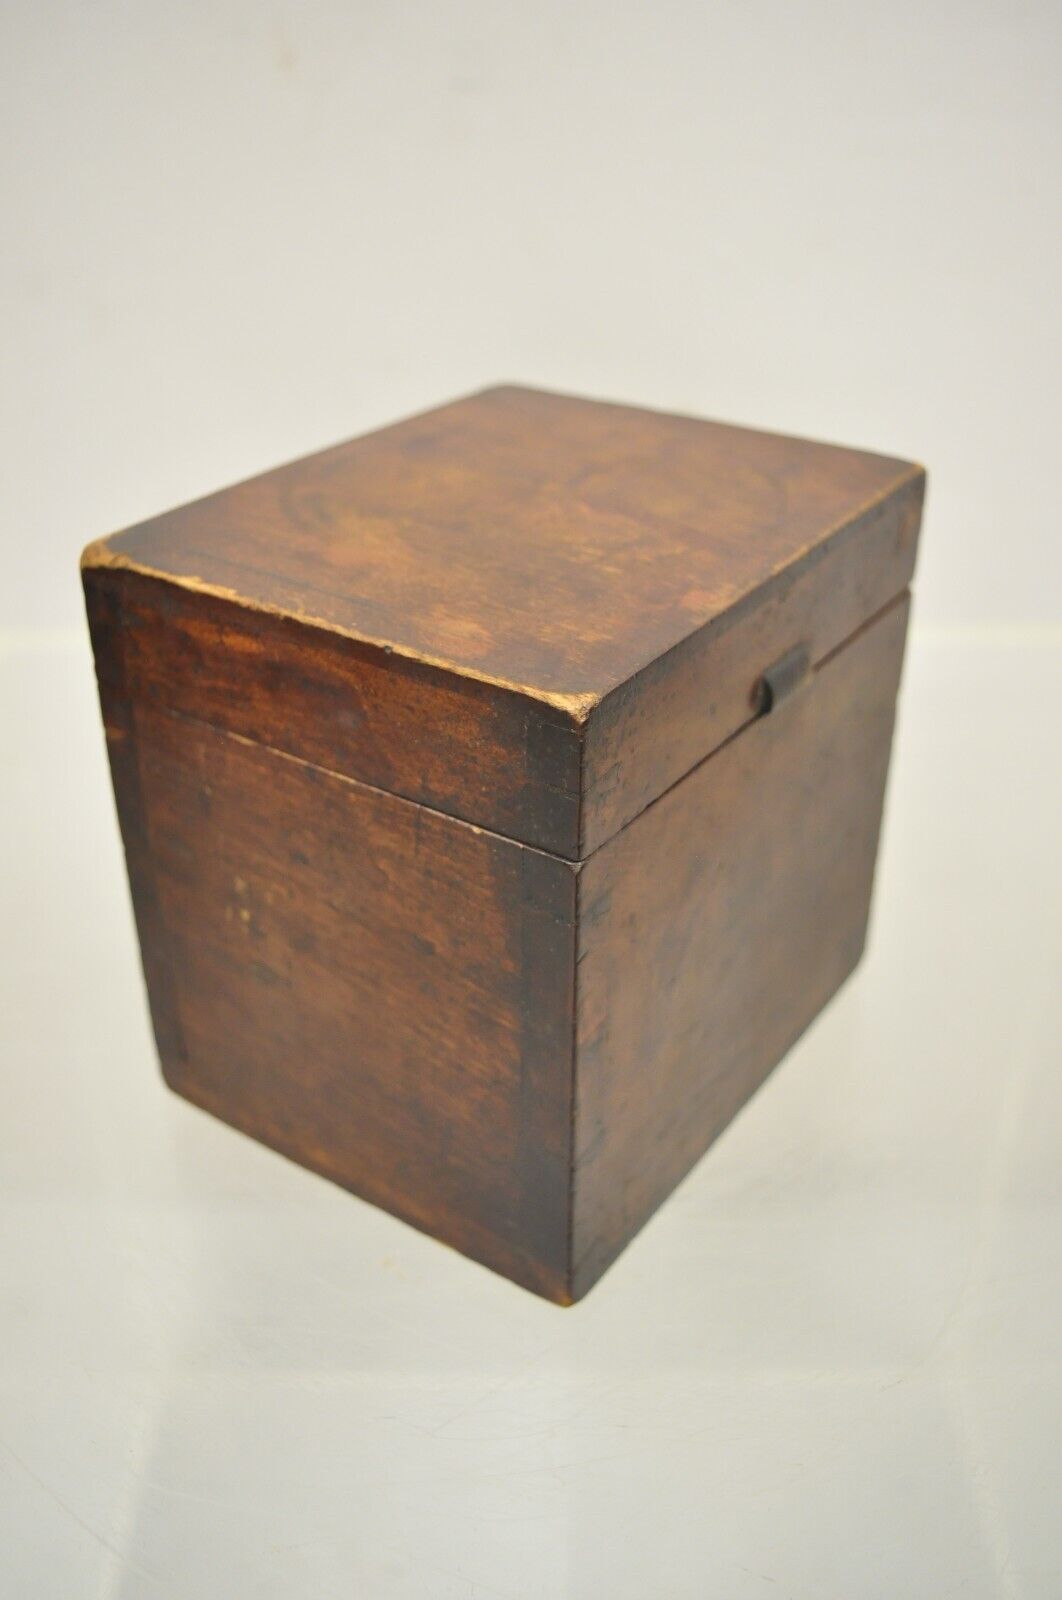 Antique English Walnut Tea Caddy Small Desk Box Victorian with Dovetail